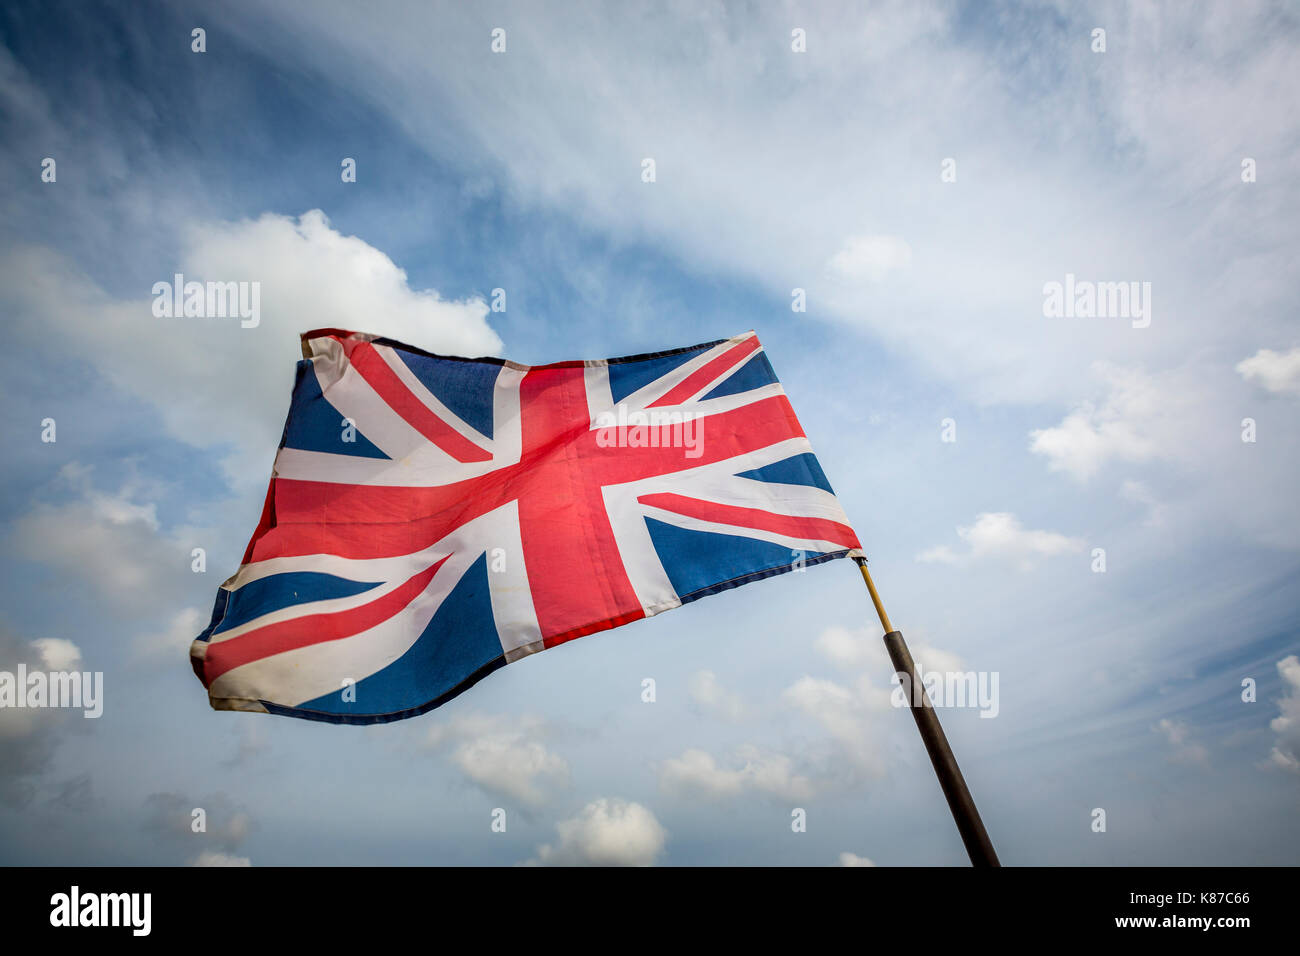 The Union flag also known as The Union Jack. Fluttering in the breeze. Stock Photo